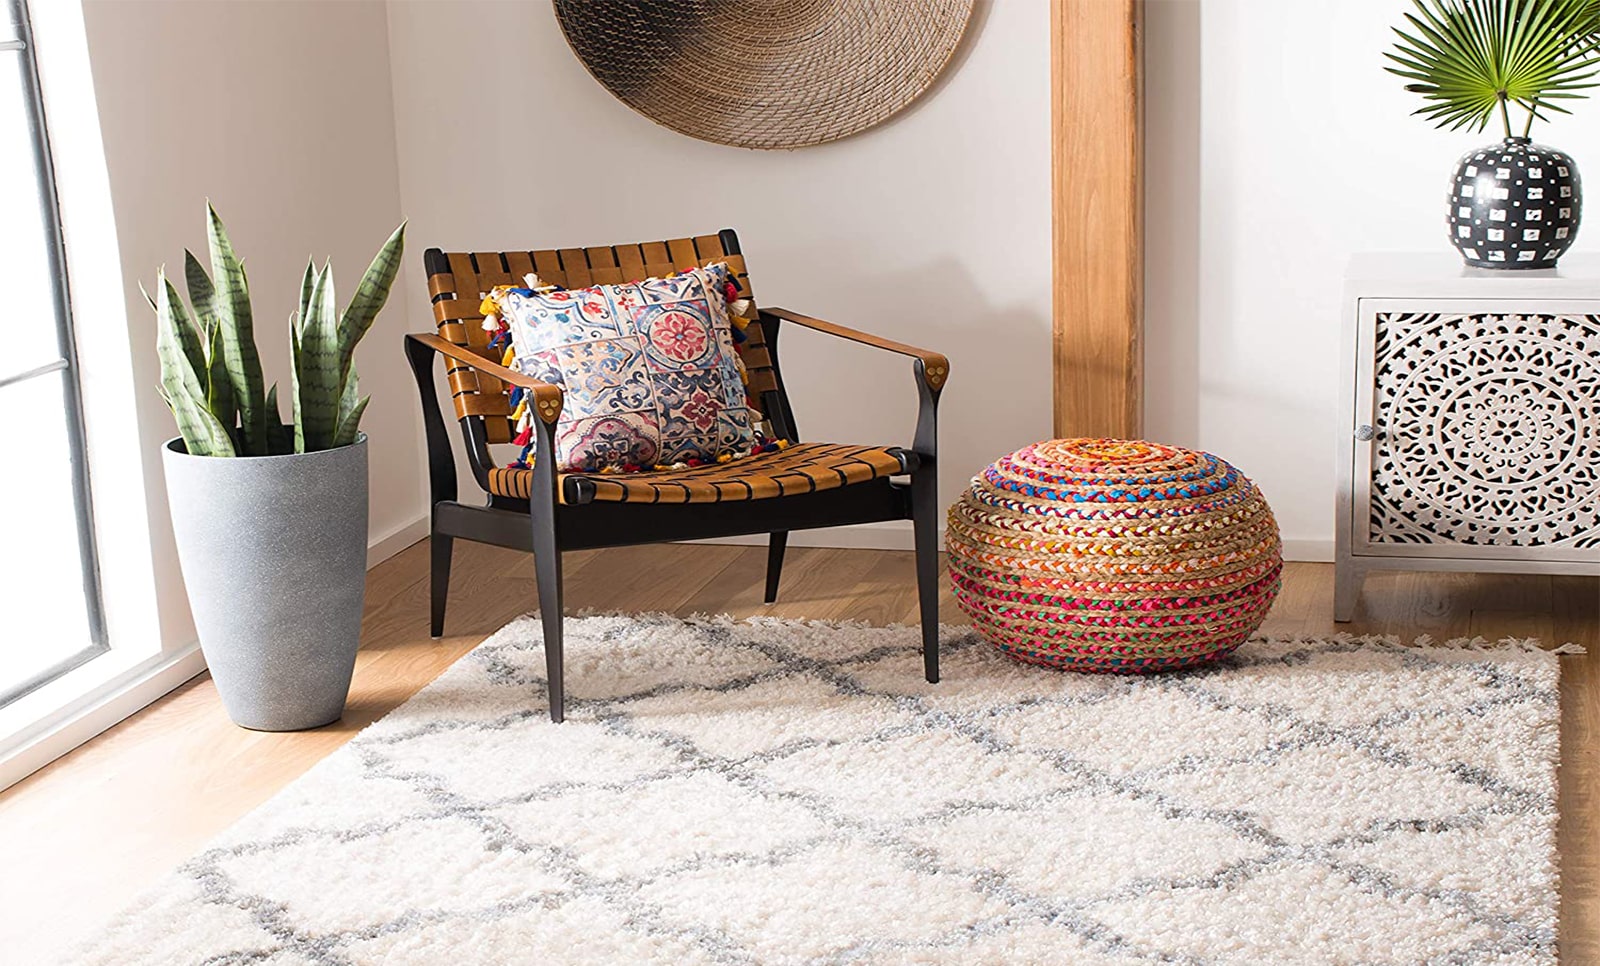 The ideal footrest and decorative accent for your home is a Moroccan pouf